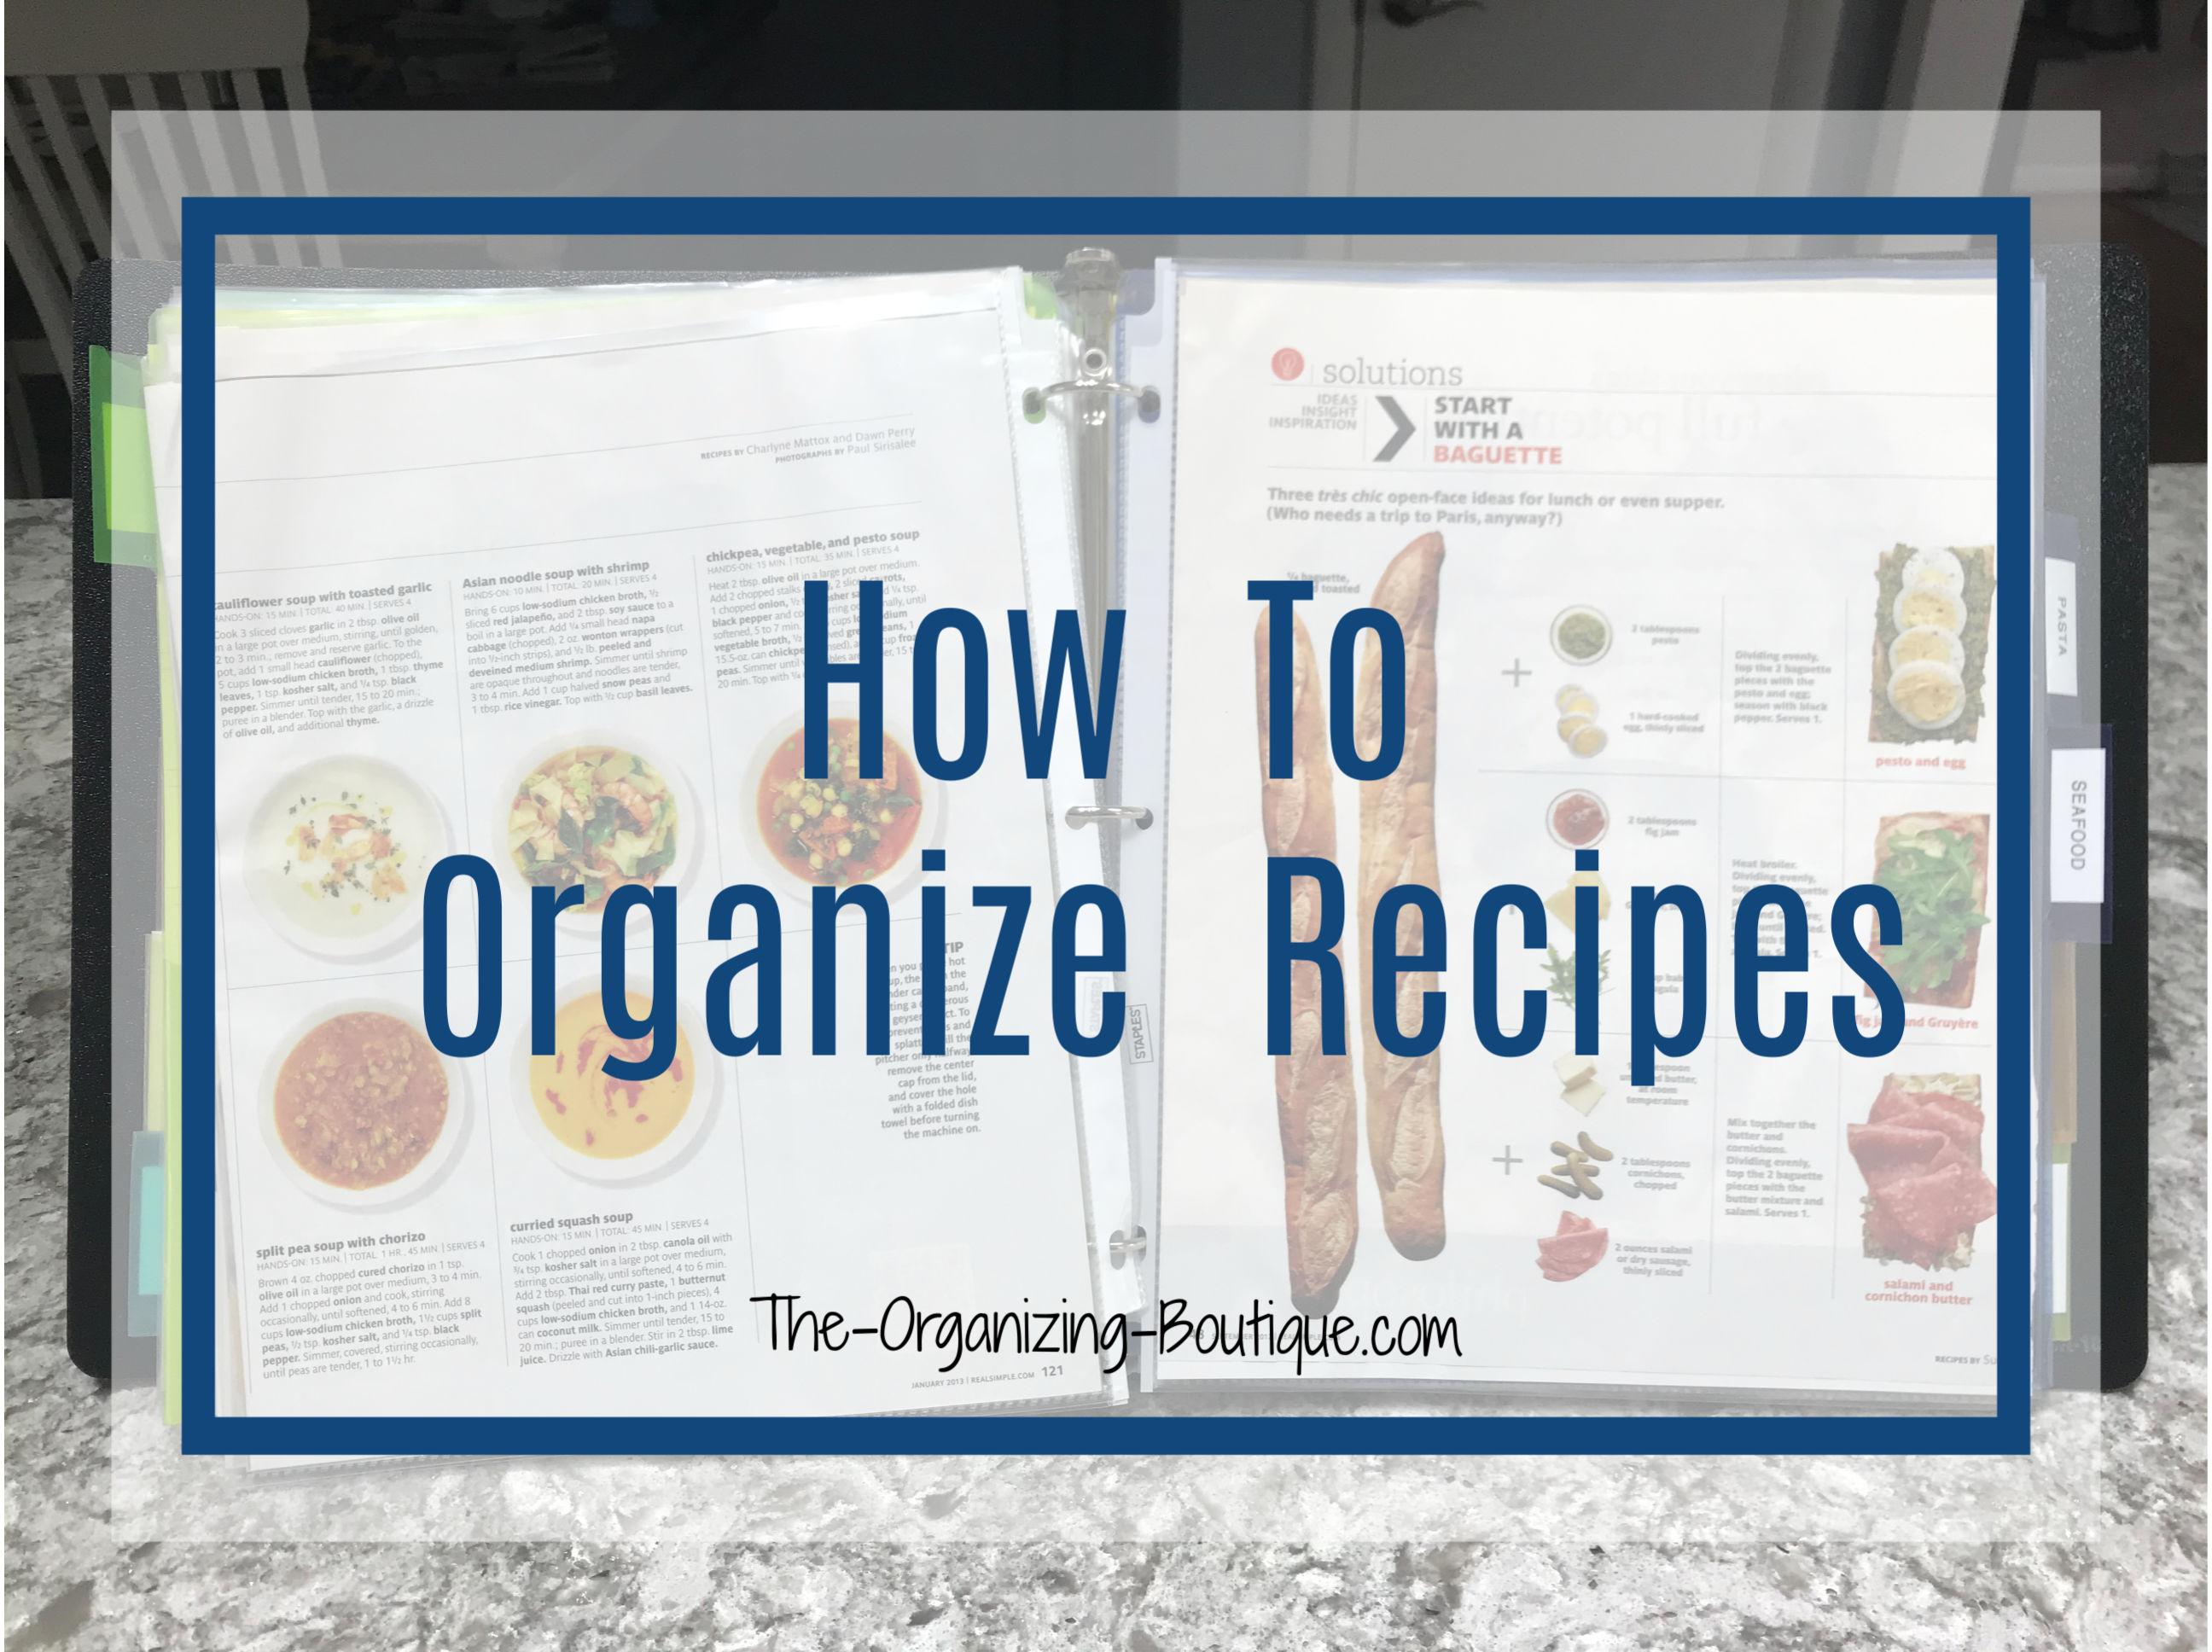 Check out these delicious recipe organization tips and recipe book binder suggestions!